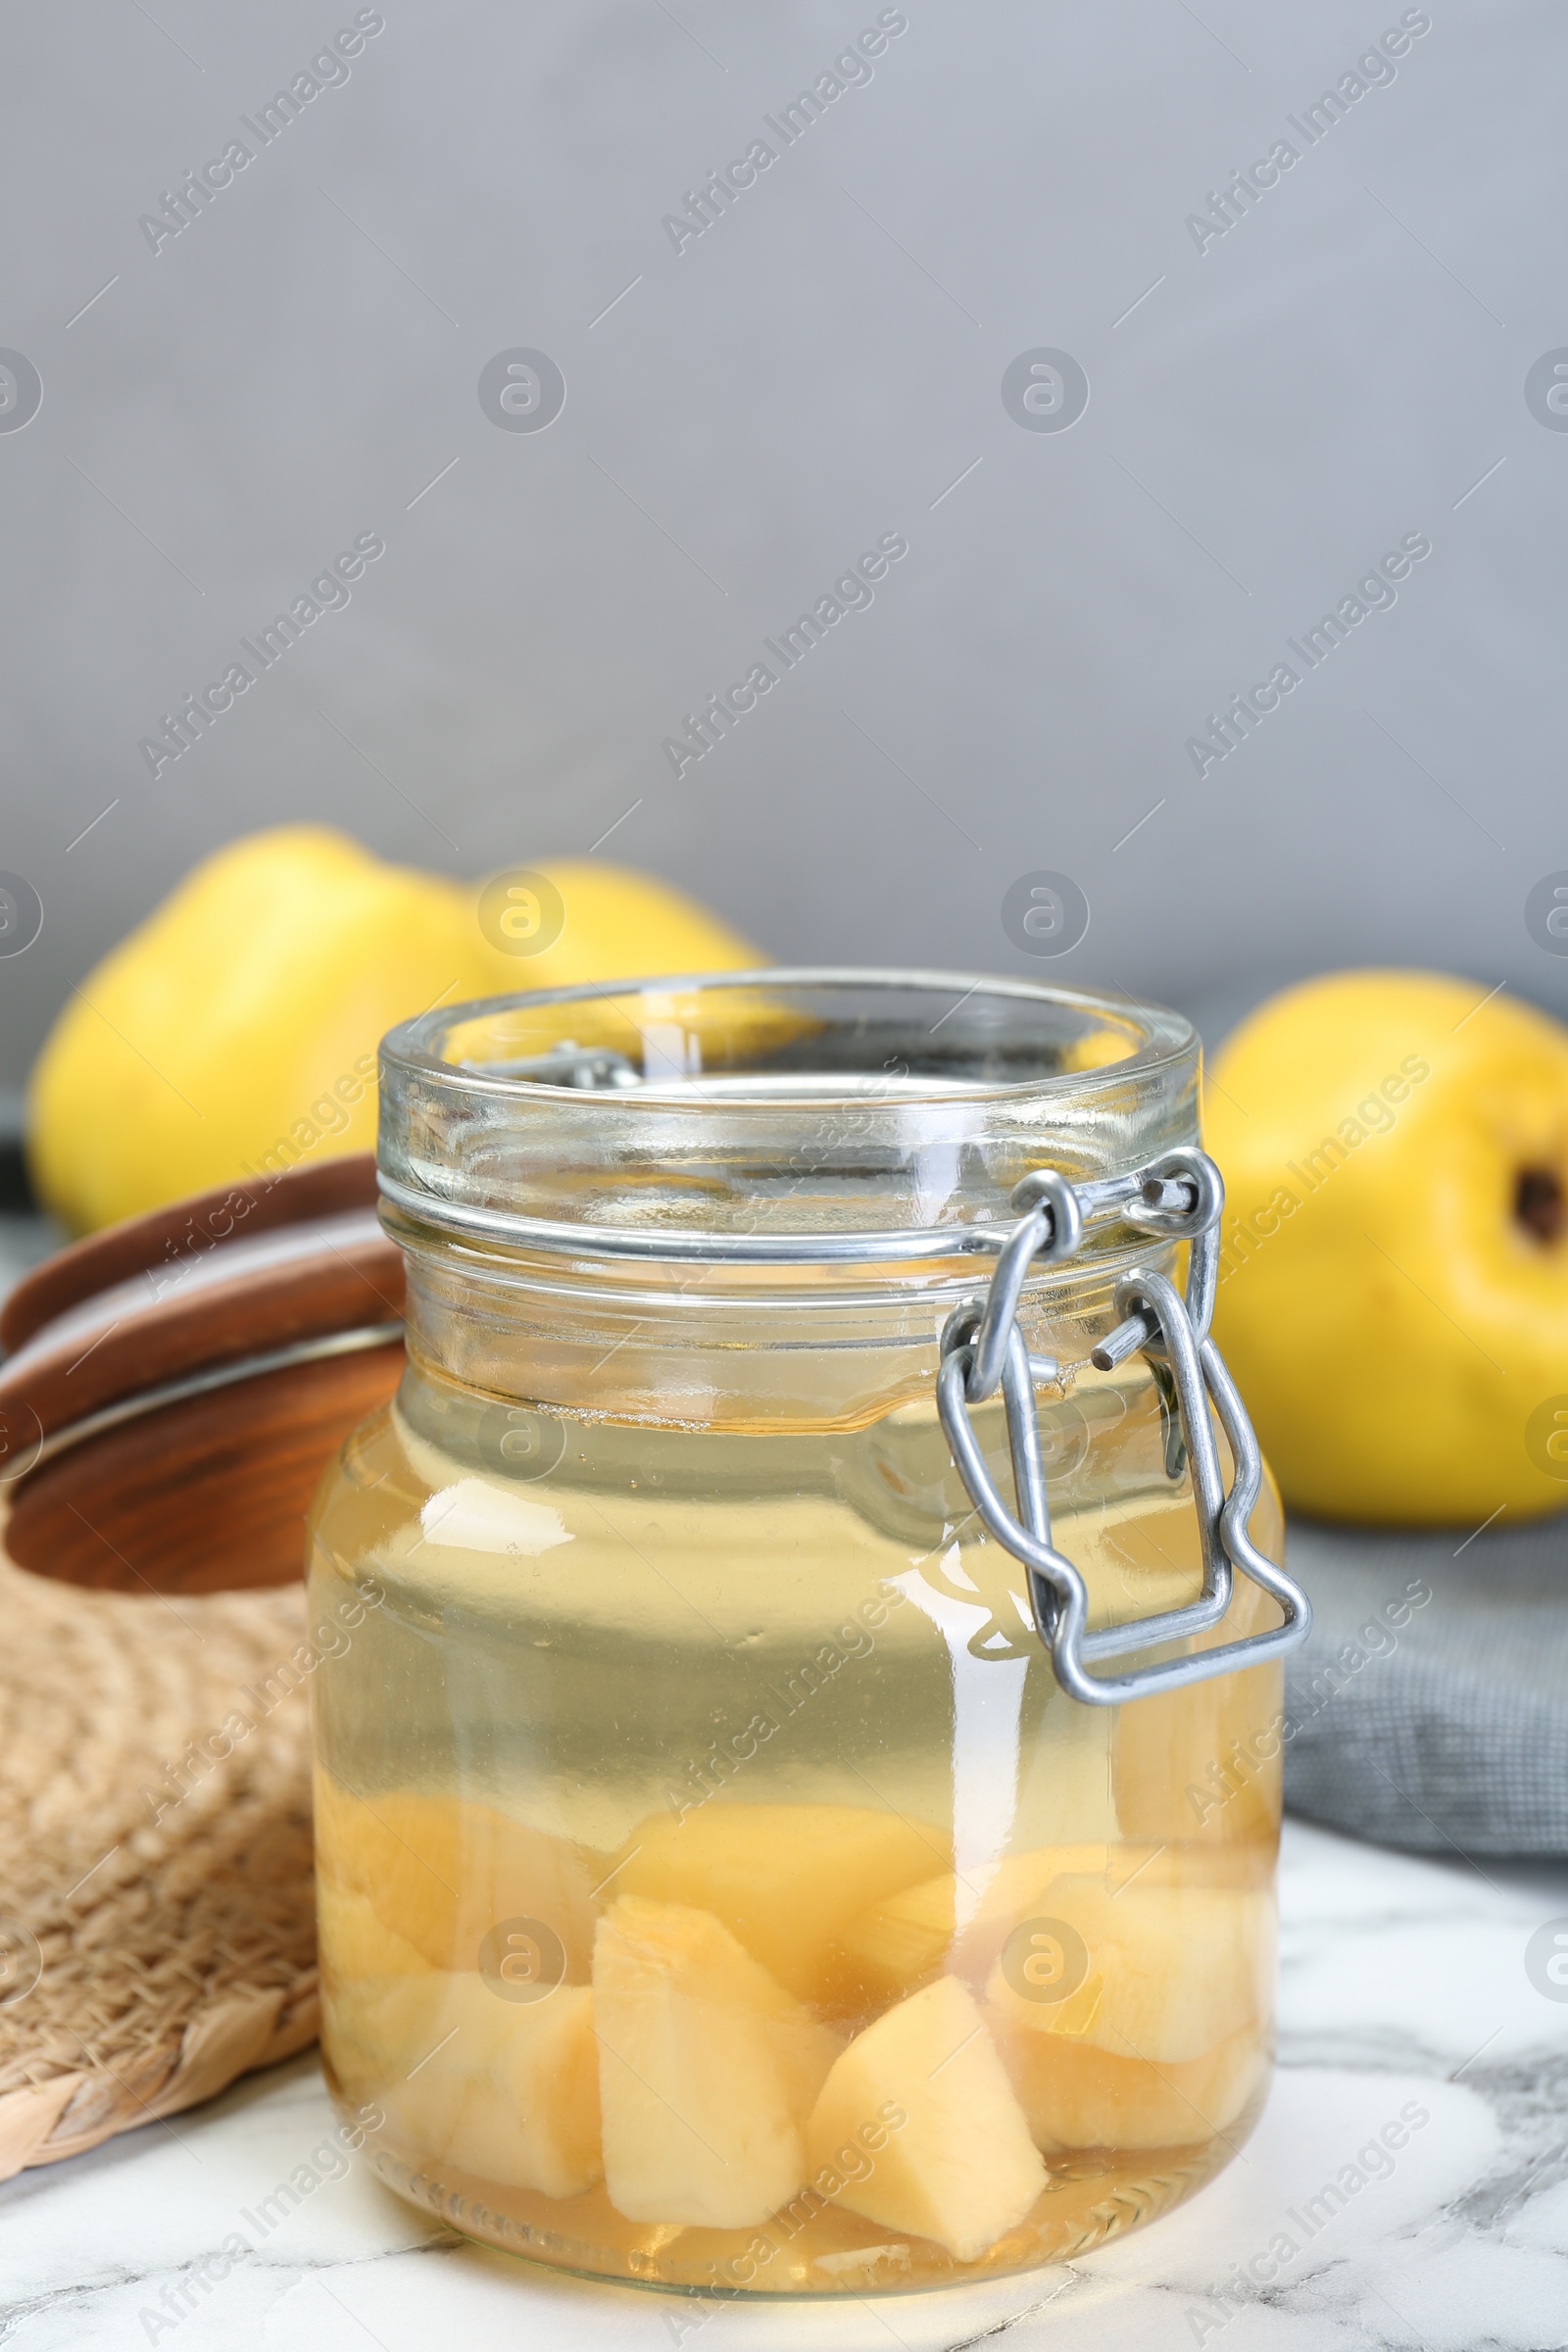 Photo of Delicious quince drink in jar on table